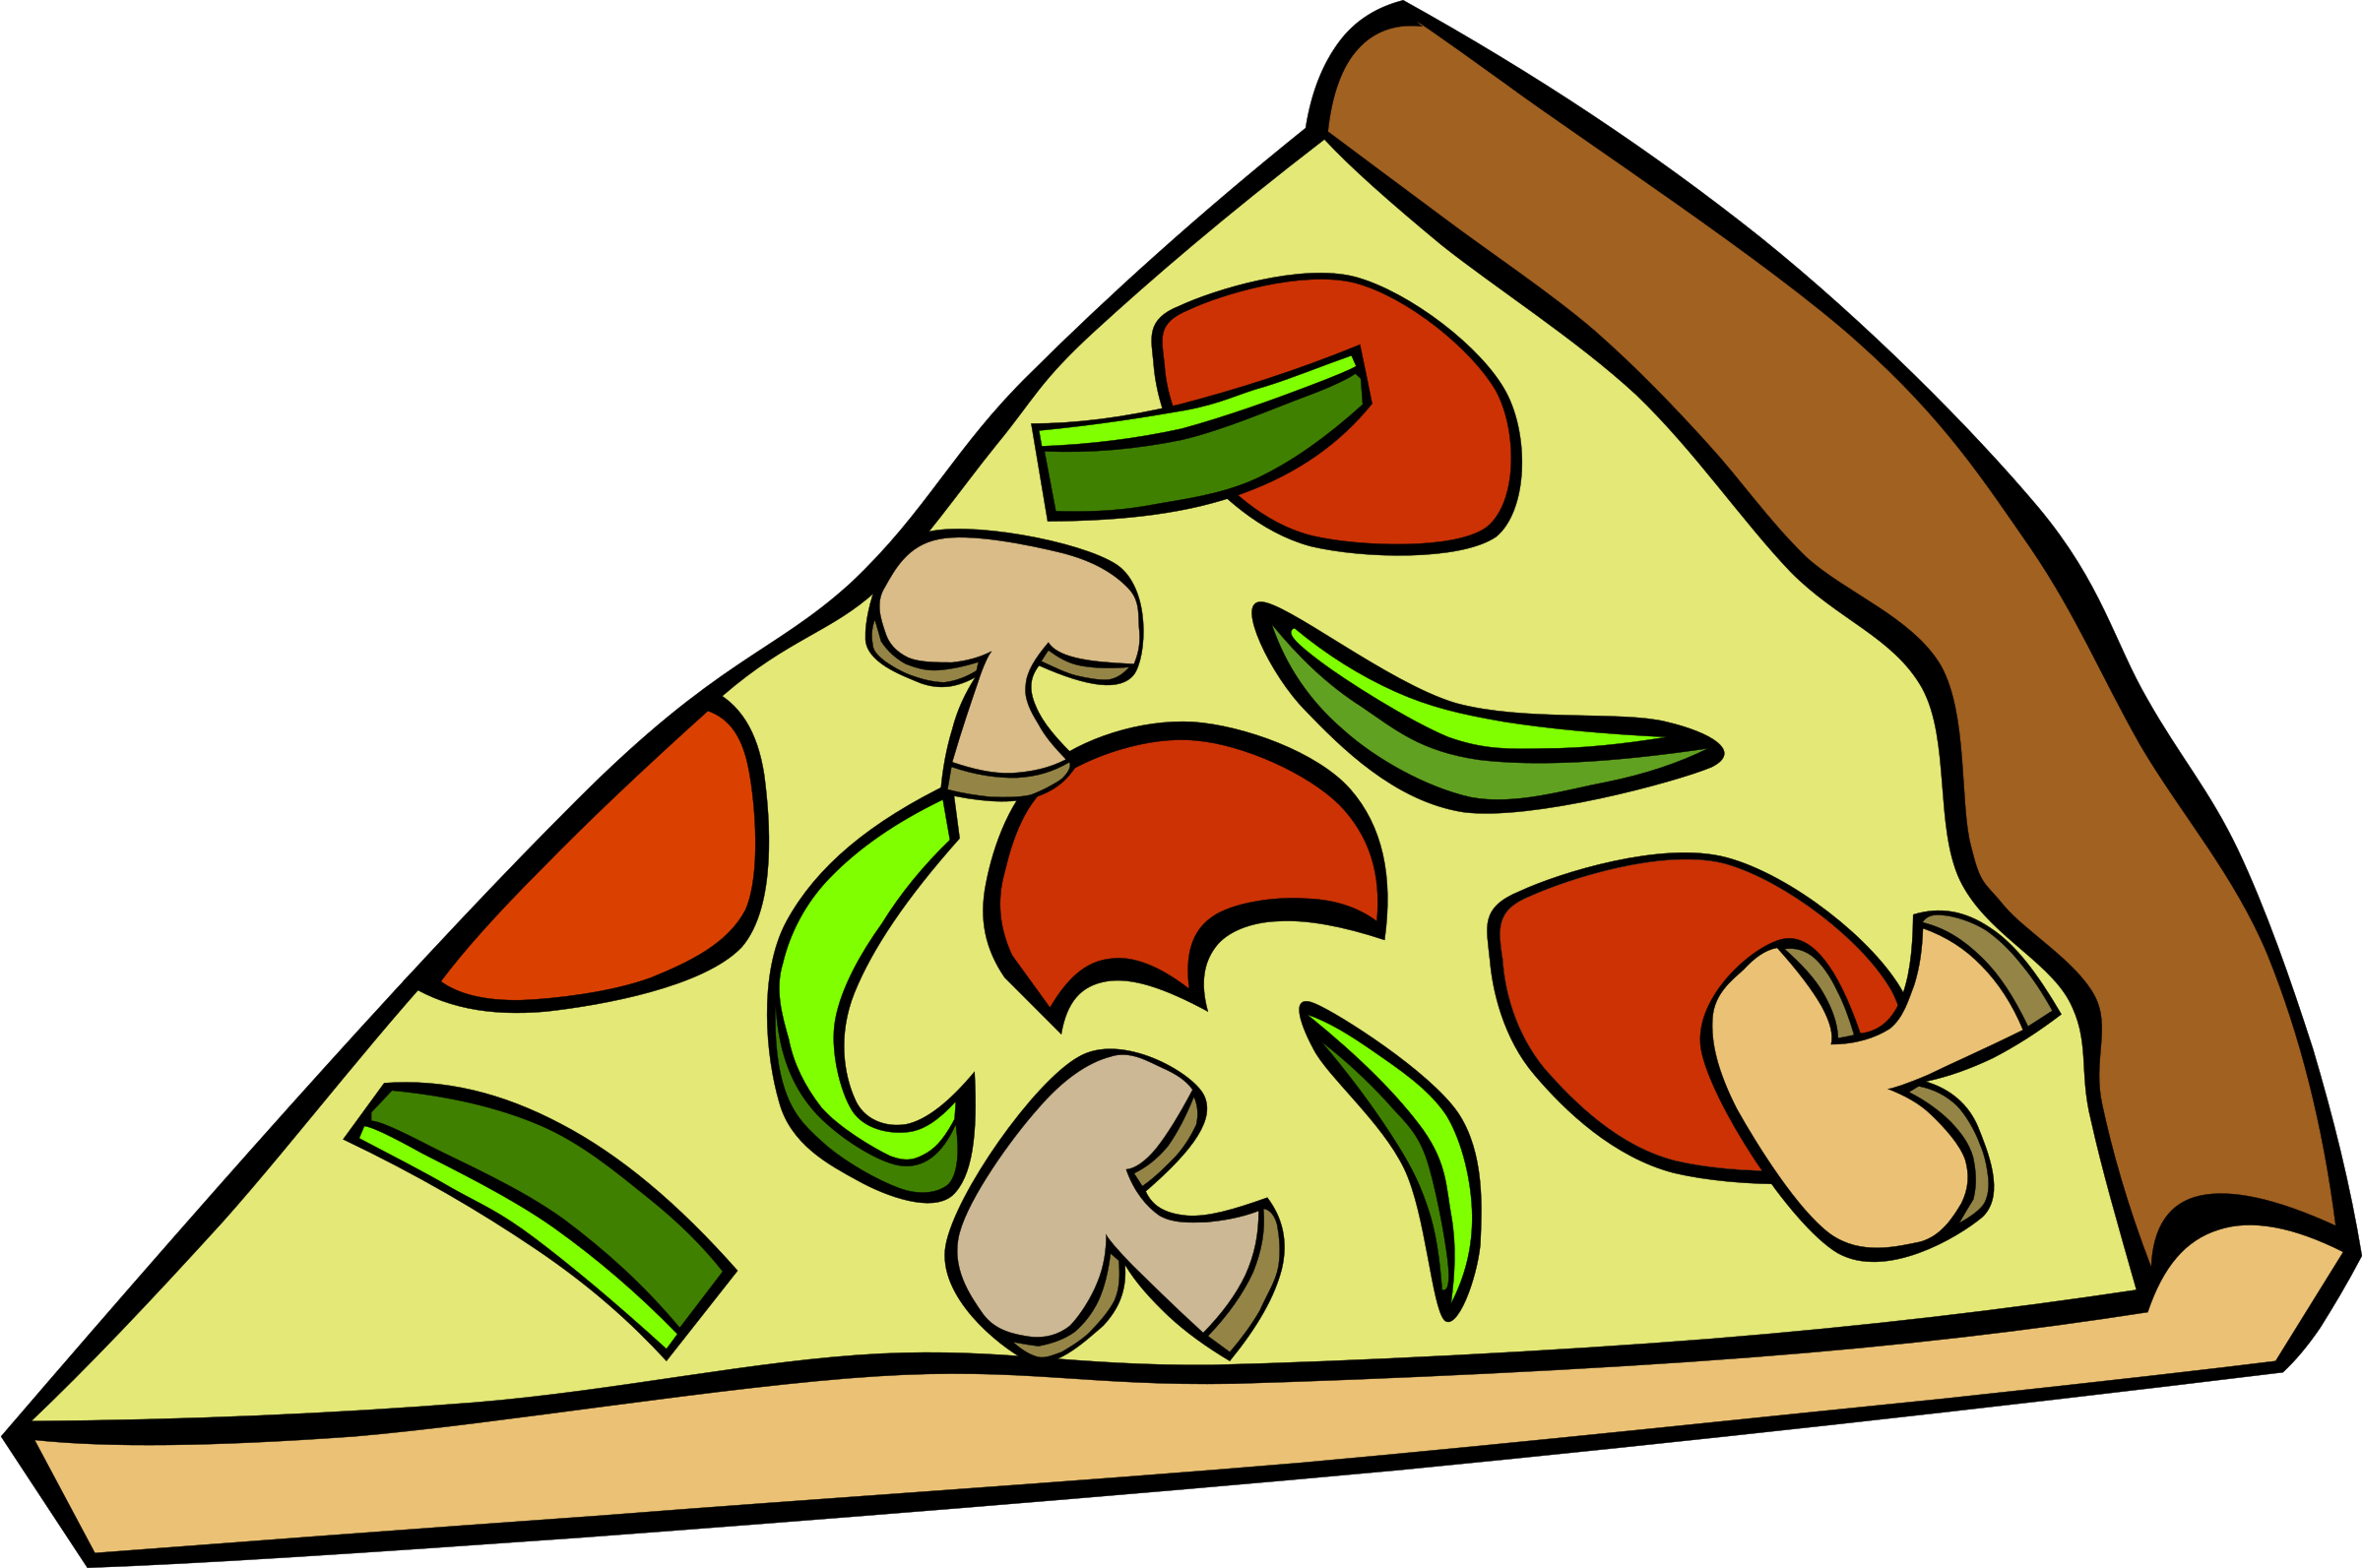 Clip Arts Related To : Pizza Slice Cartoon Pizza With Face Cartoon. 